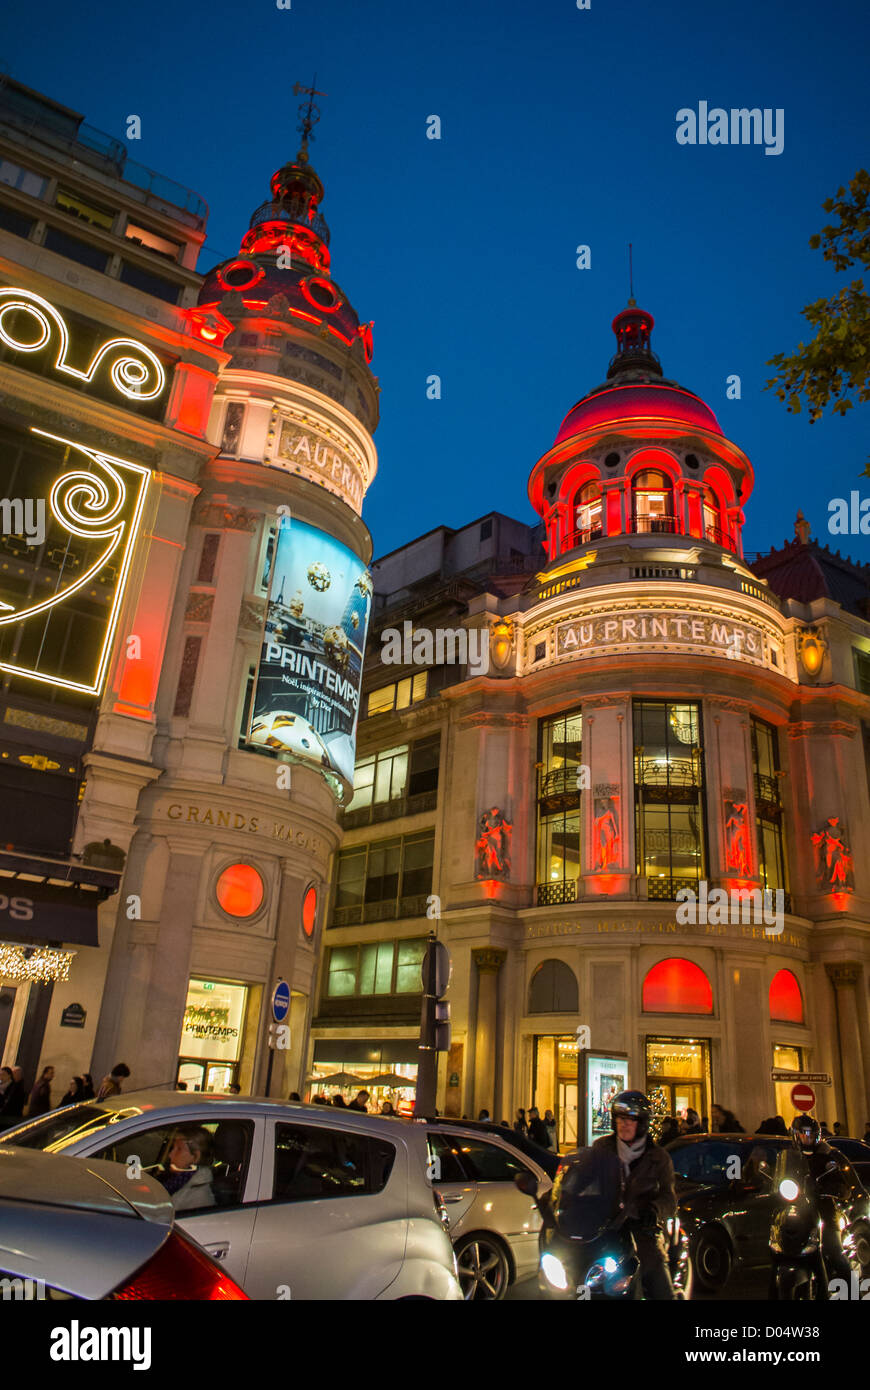 Paris, France, French Department Store, Printemps, with Christmas Decorations, Lighting at Night Lighting Display, haussmann Stock Photo